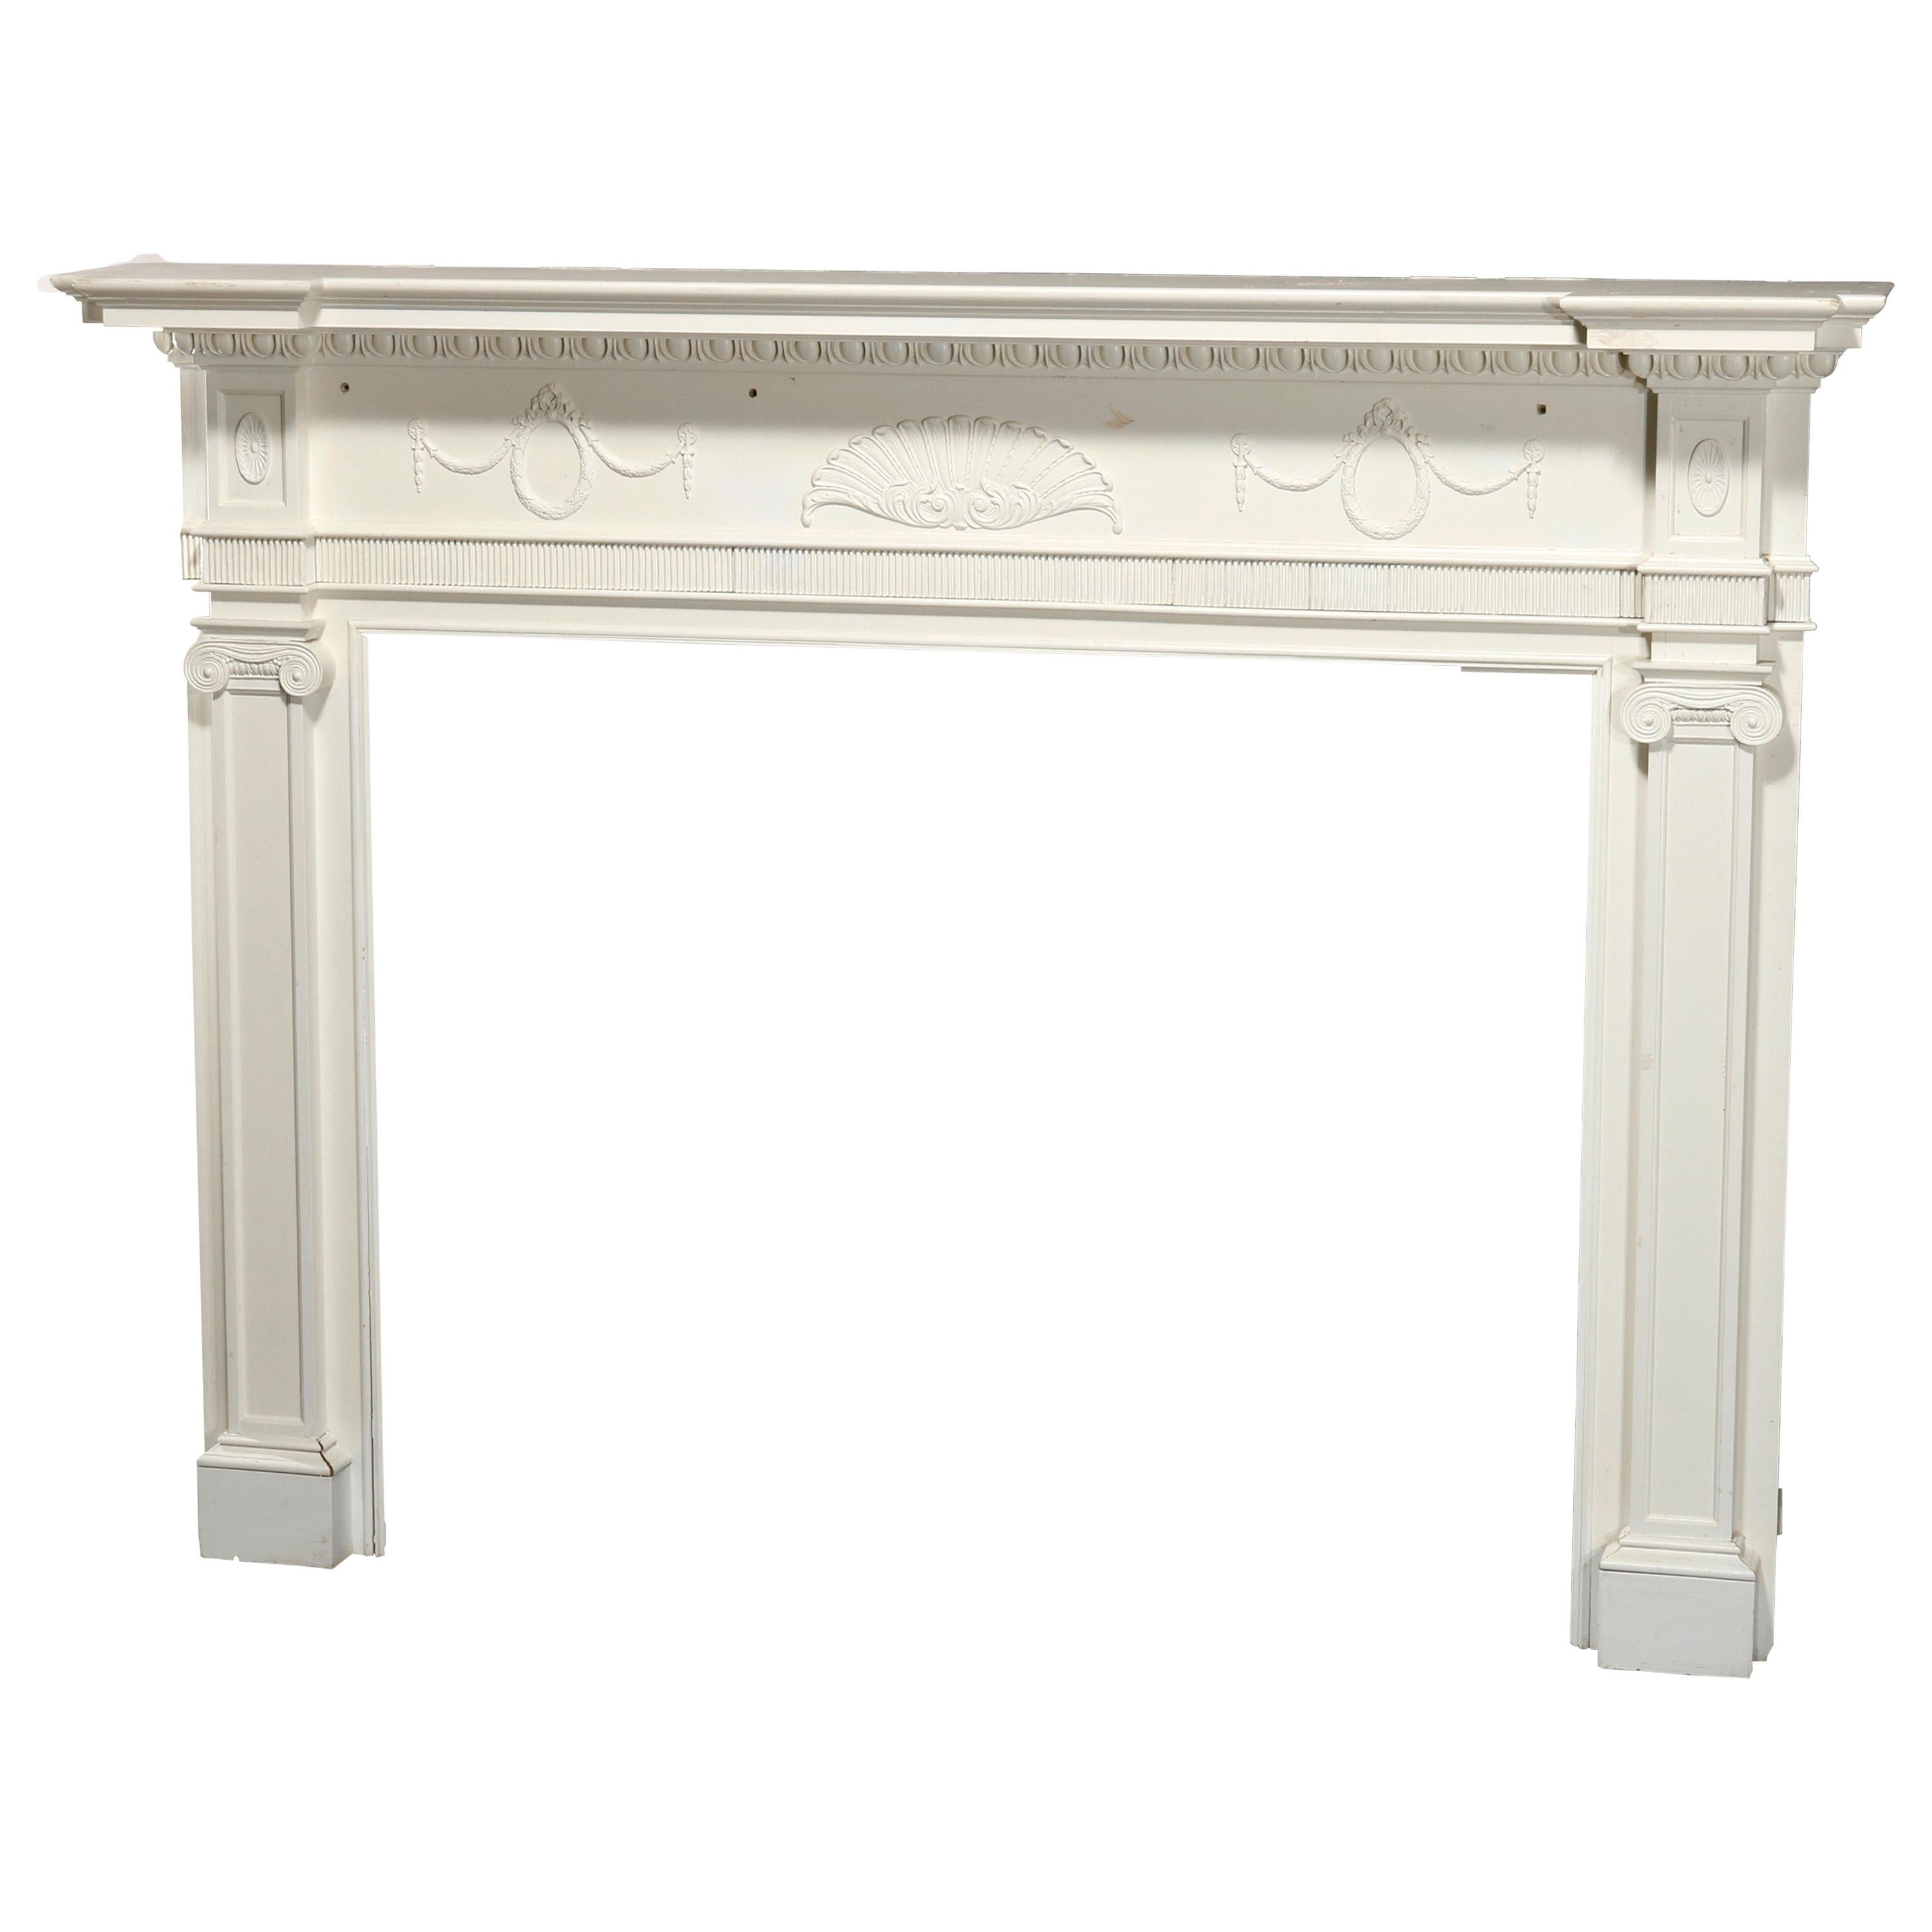 Antique Neoclassical Carved and White-Painted Fireplace Mantel, 20th Century